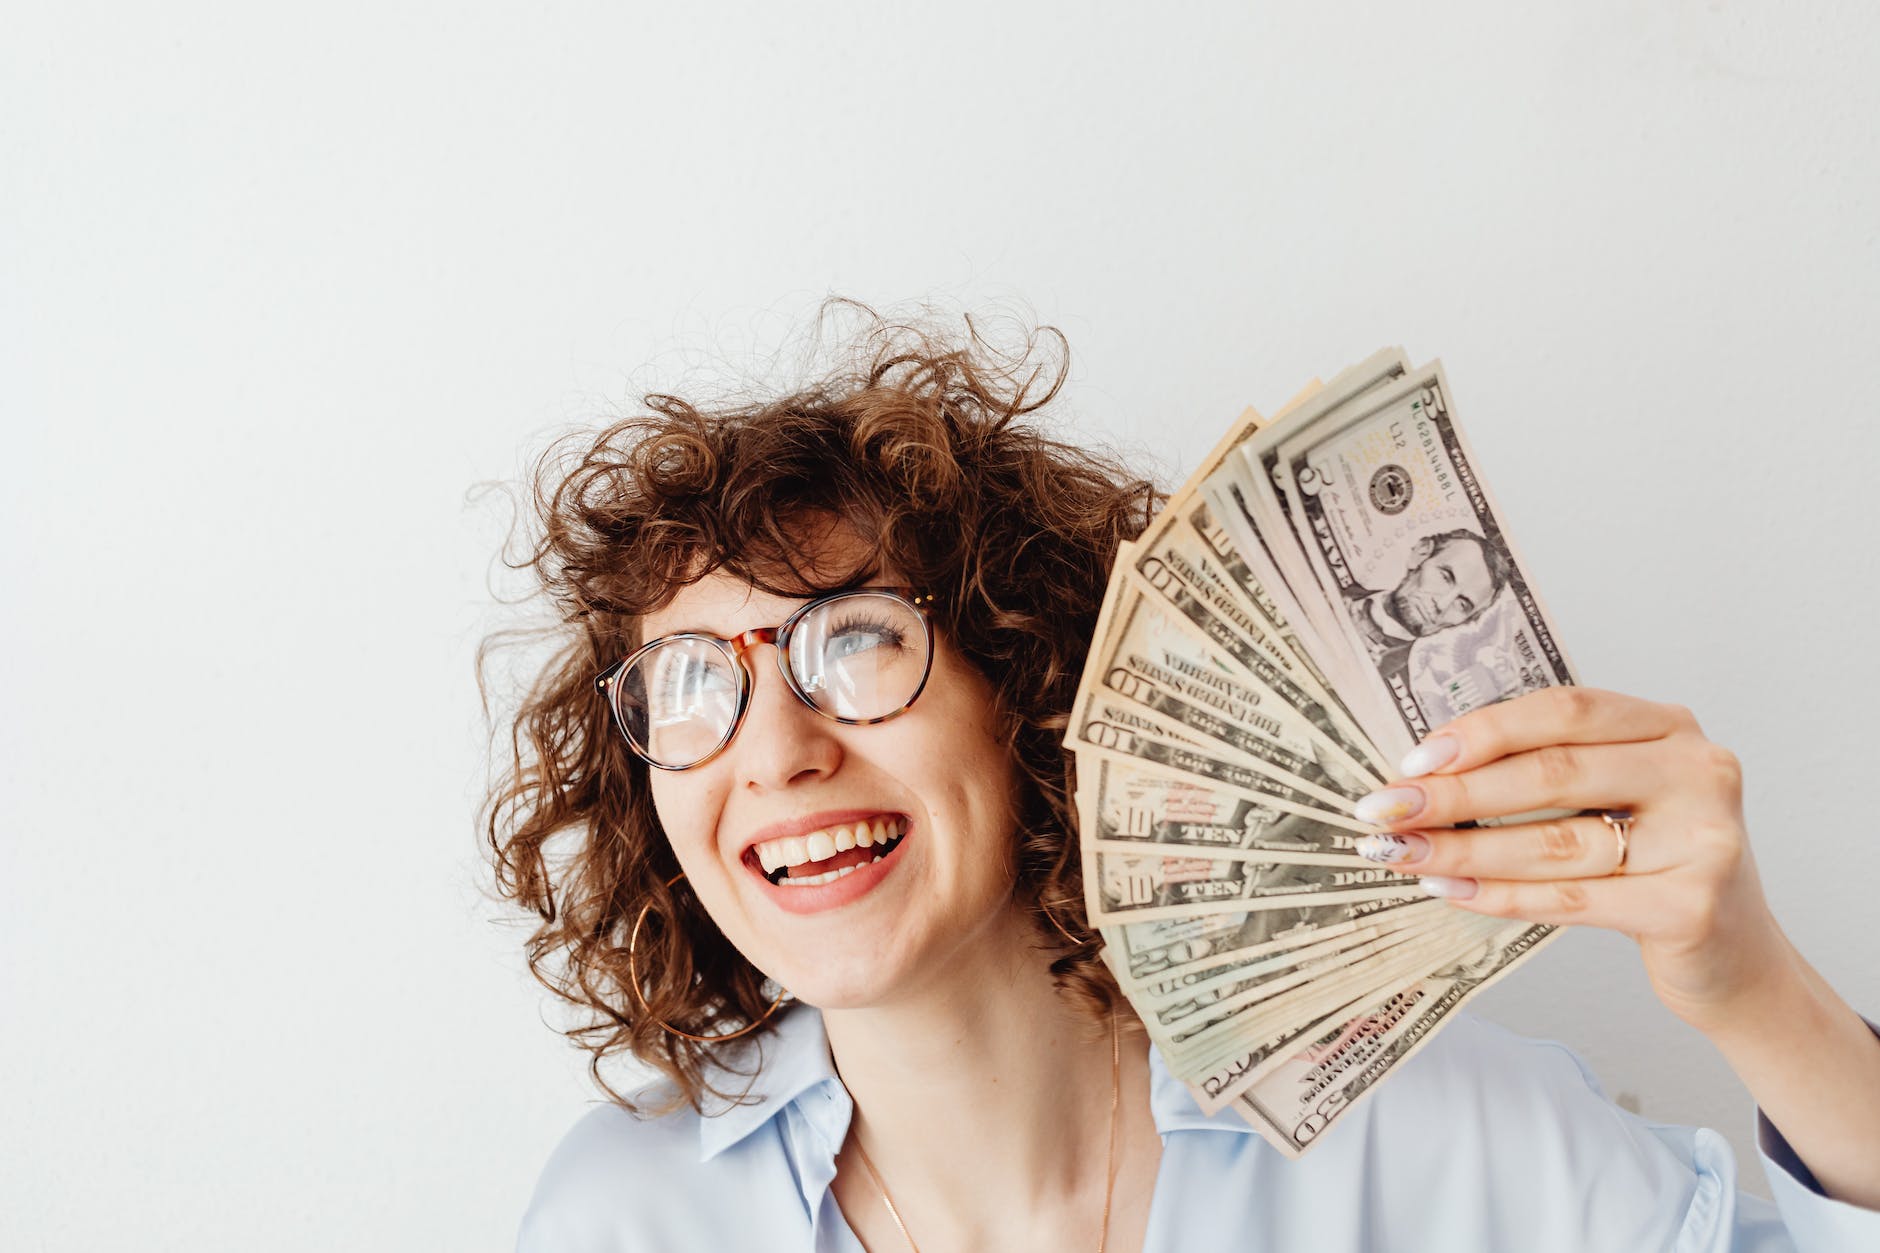 a woman holding us dollar bills and looking happy representing money and happiness.
